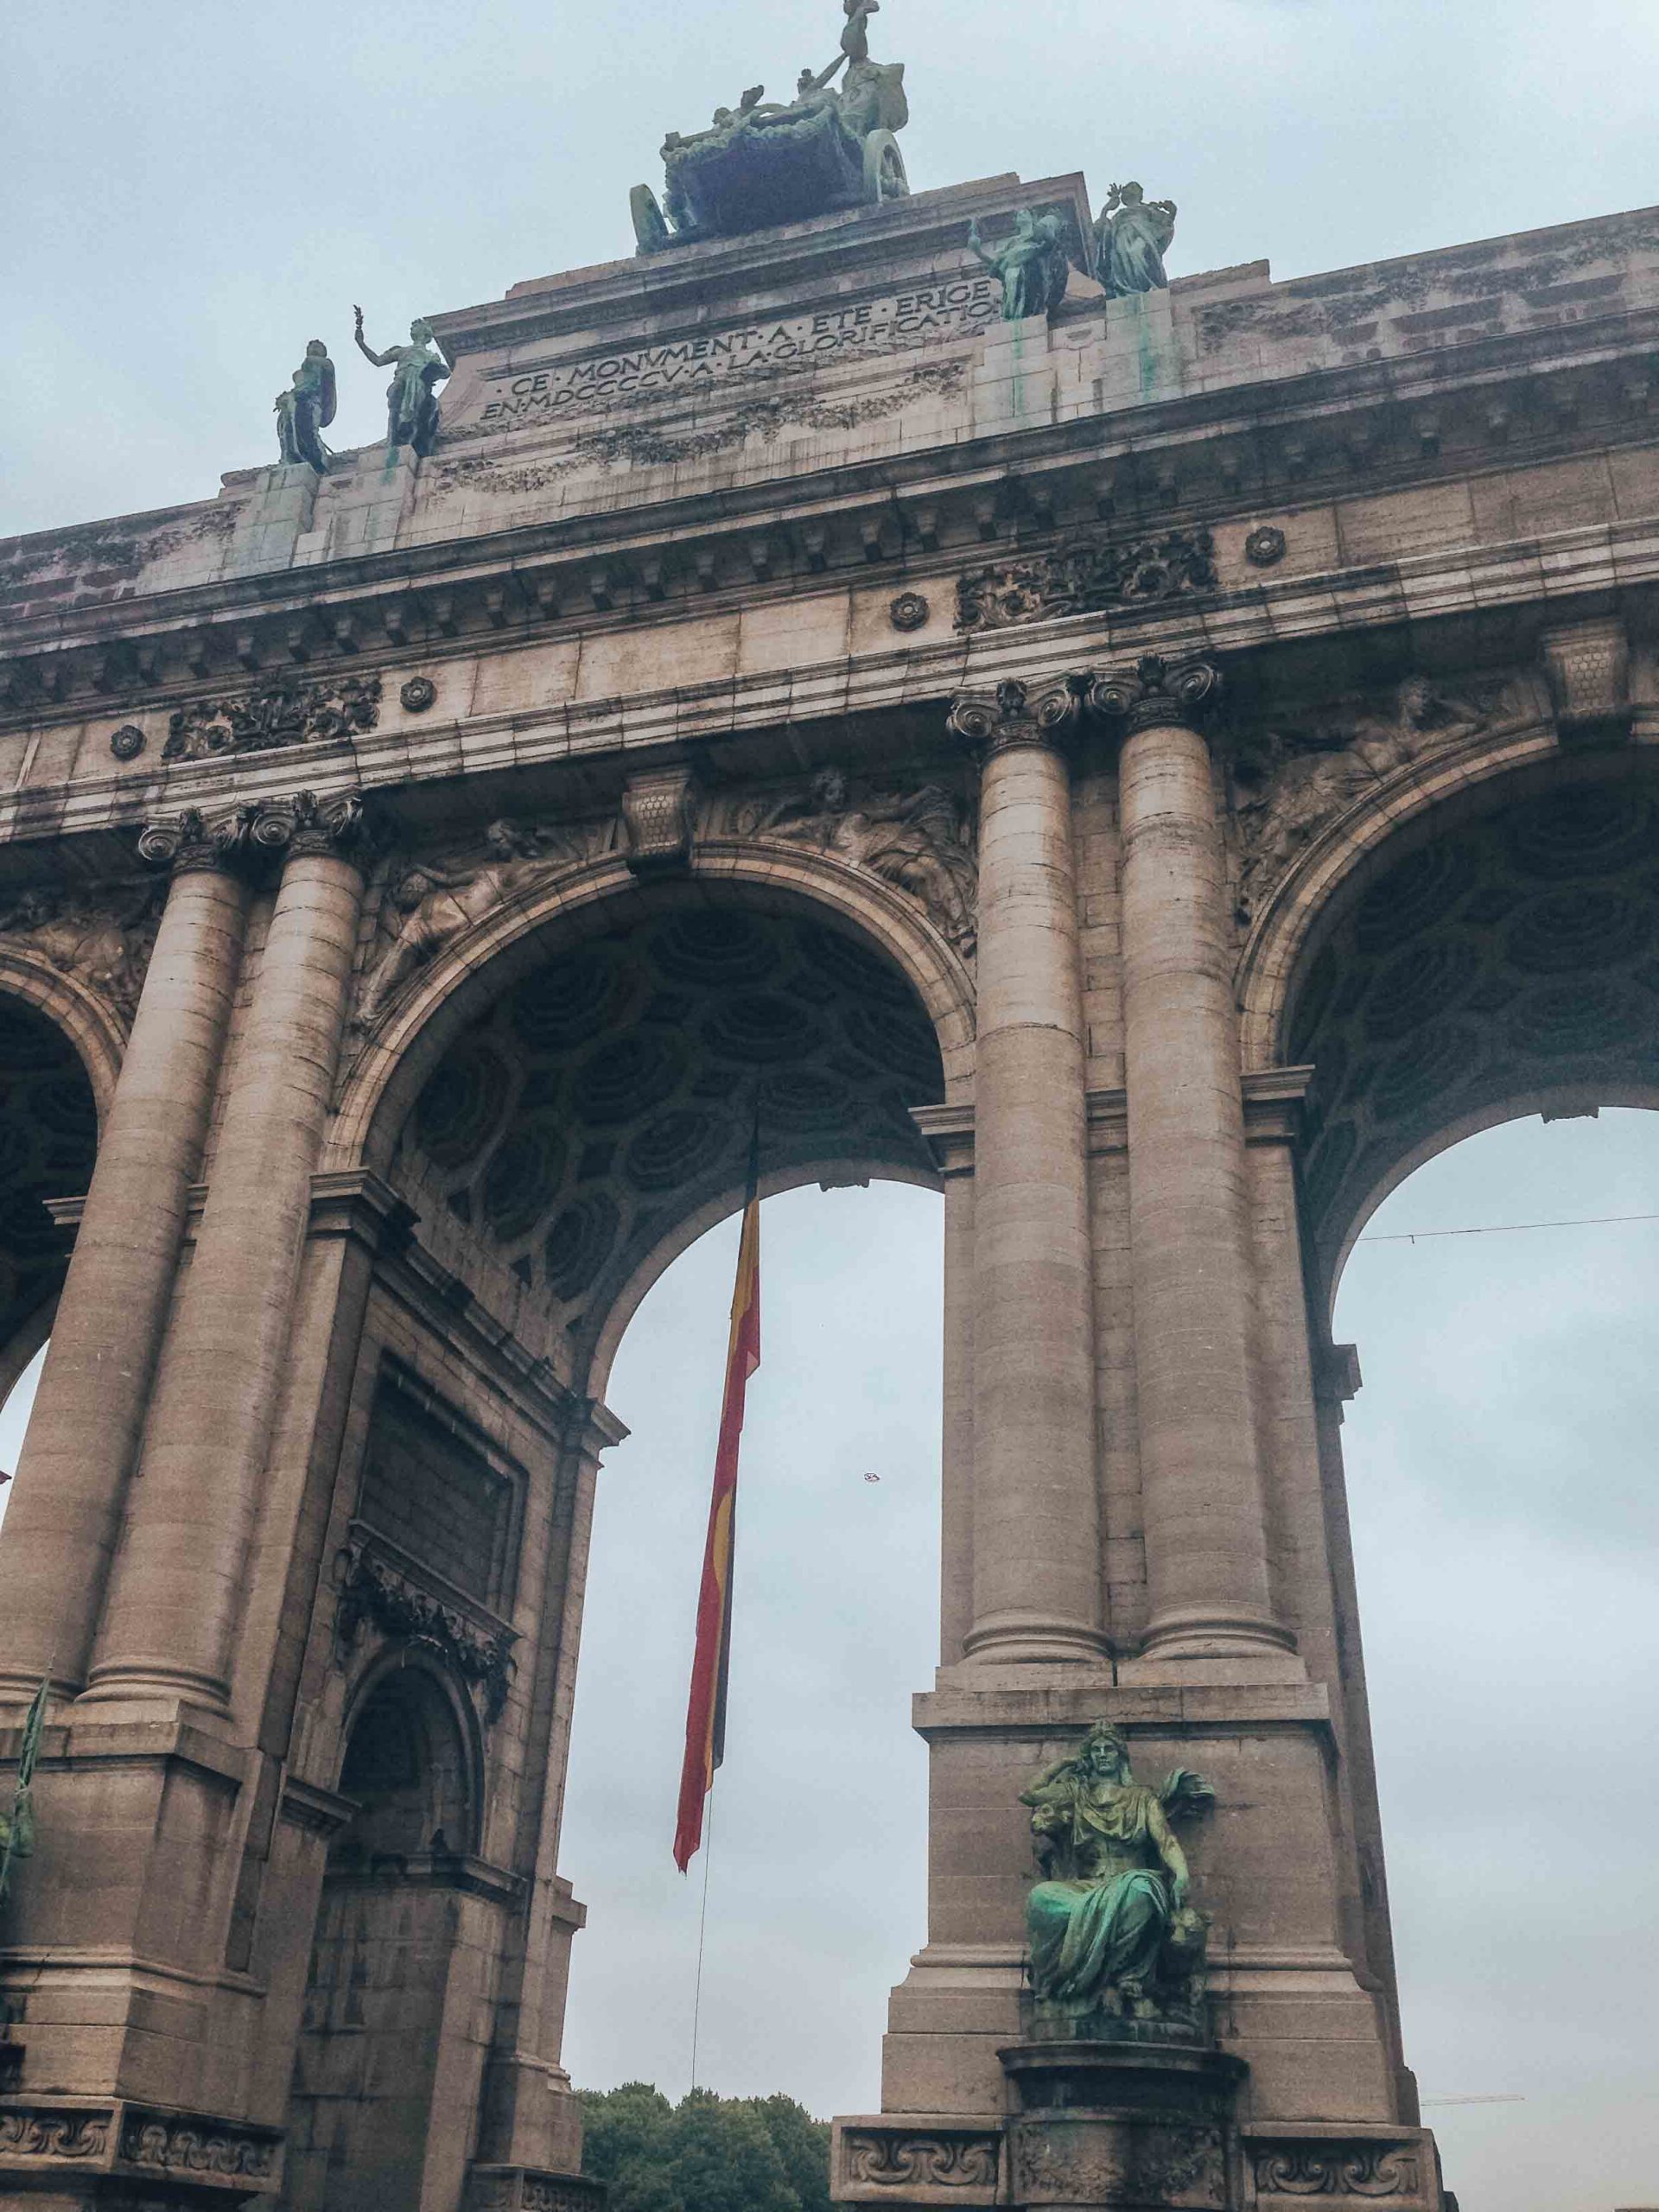 The arch of Cinquantenaire park in Brussels